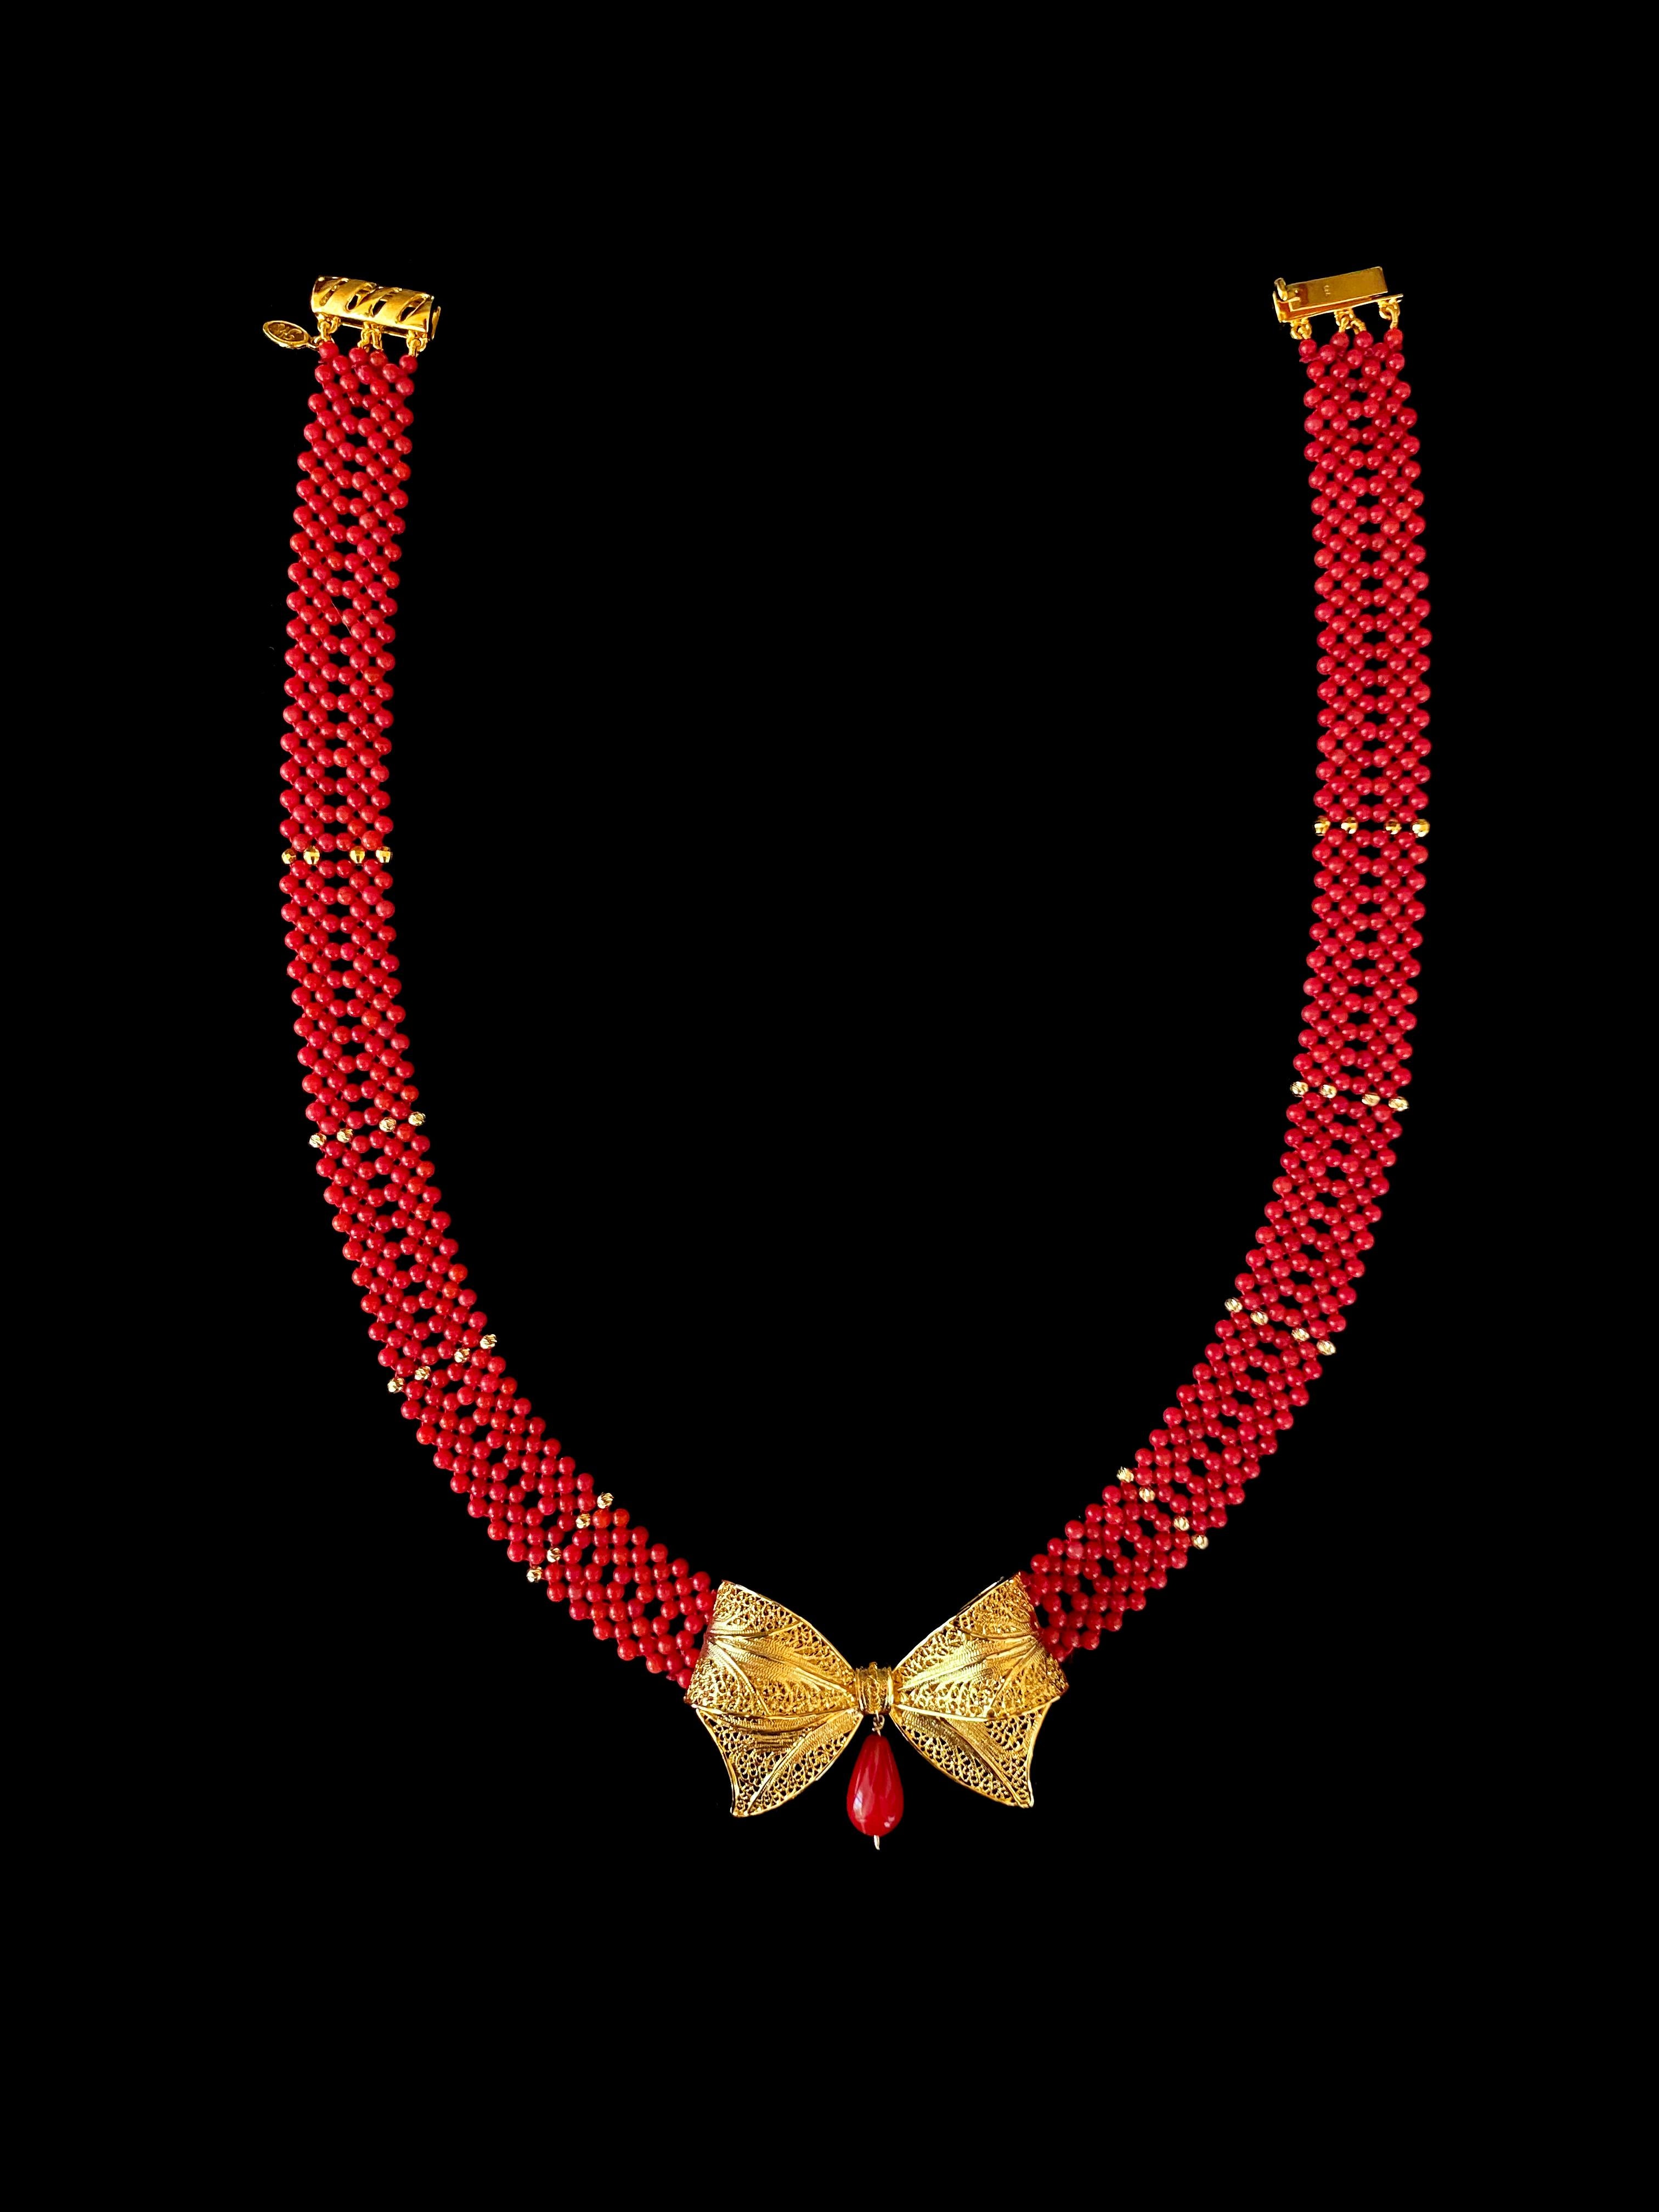 Marina J Coral Woven Necklace with 18k Plated Bowtie Centerpiece & Detailings For Sale 1